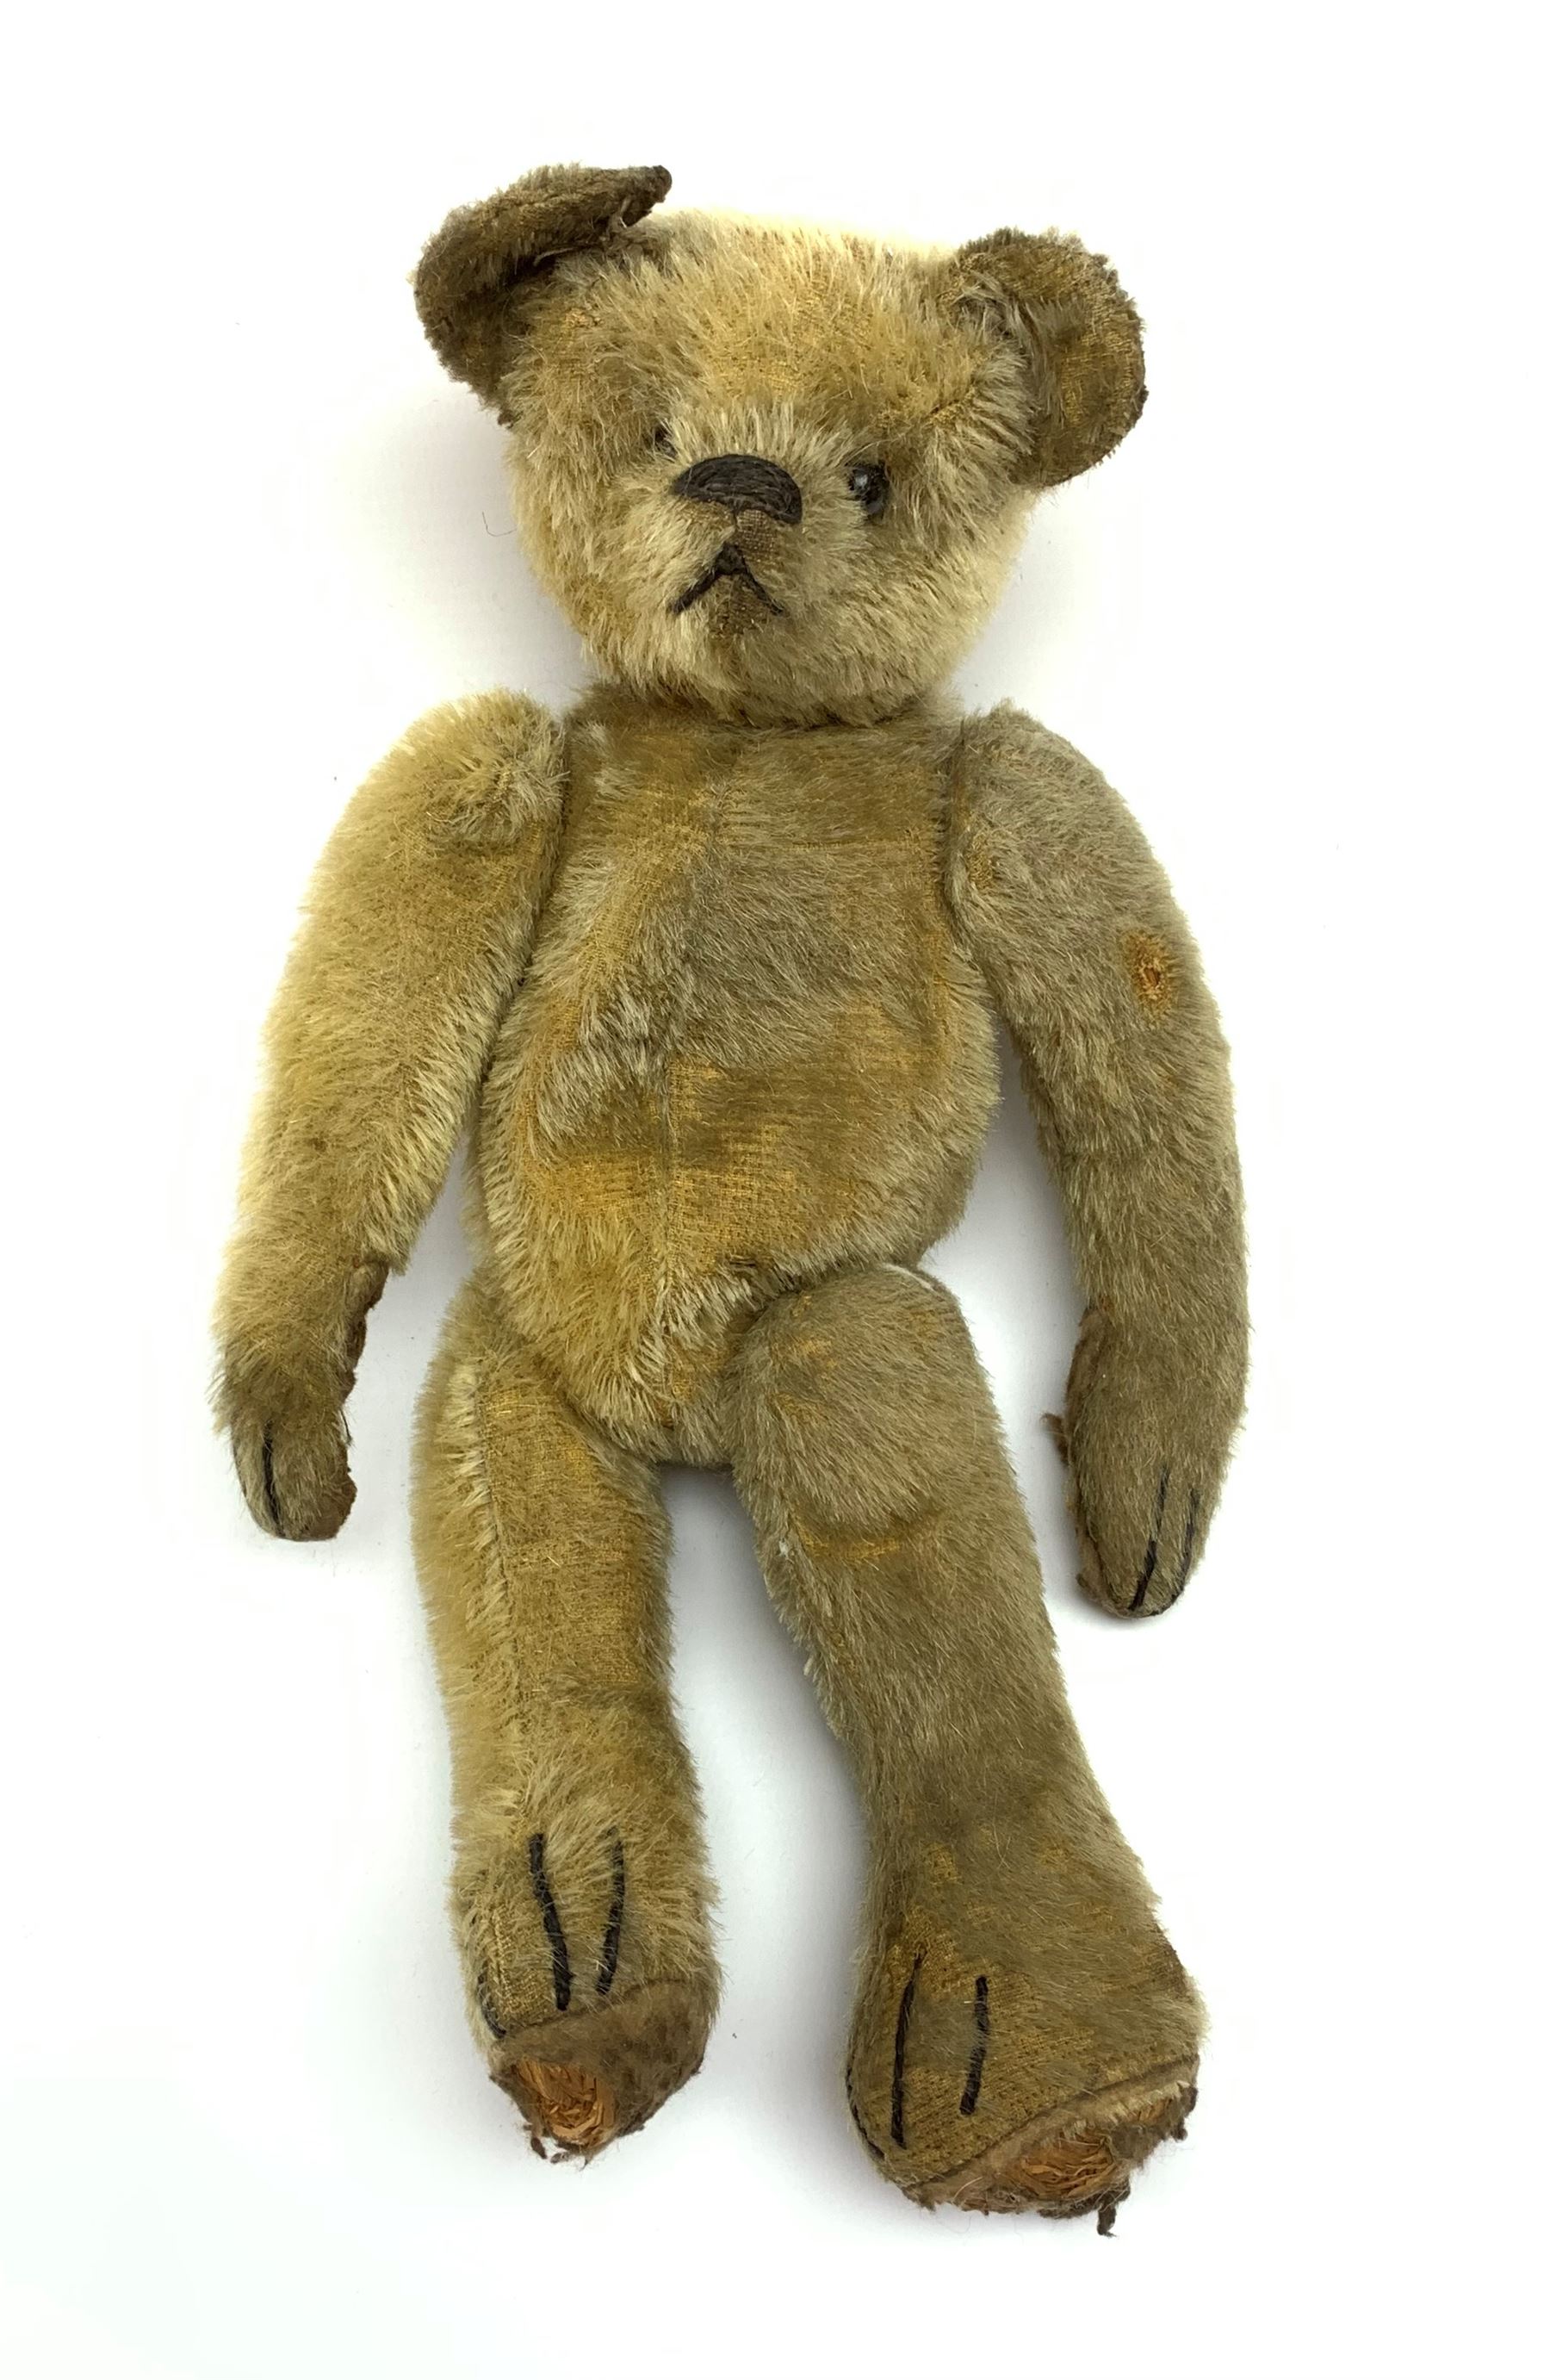 Early 20th century American mohair teddy bear c1920 with wood wool filled body humped back body with